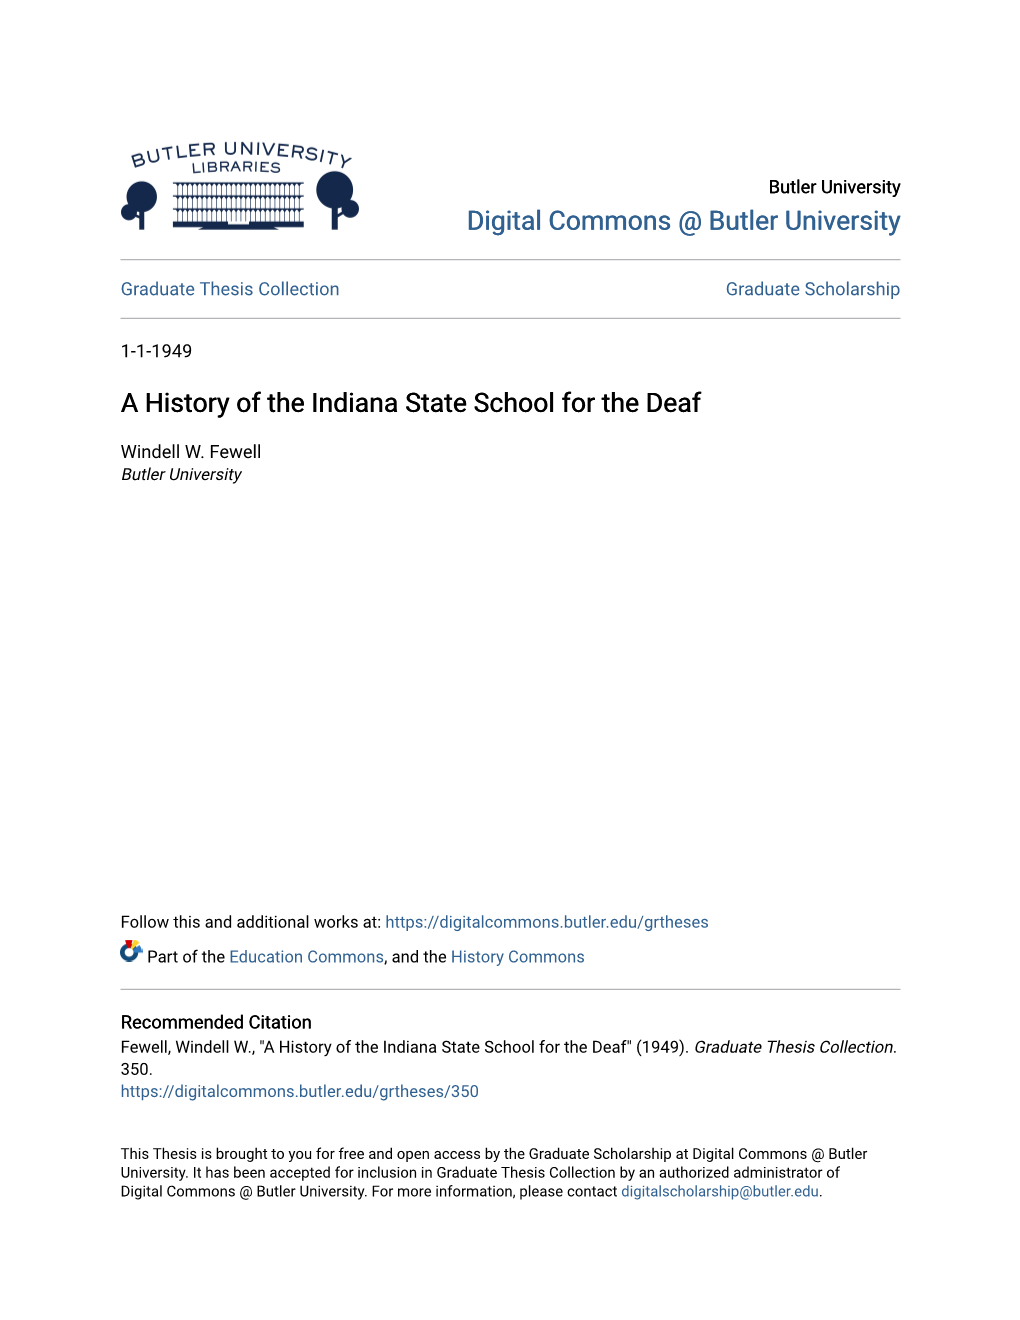 A History of the Indiana State School for the Deaf